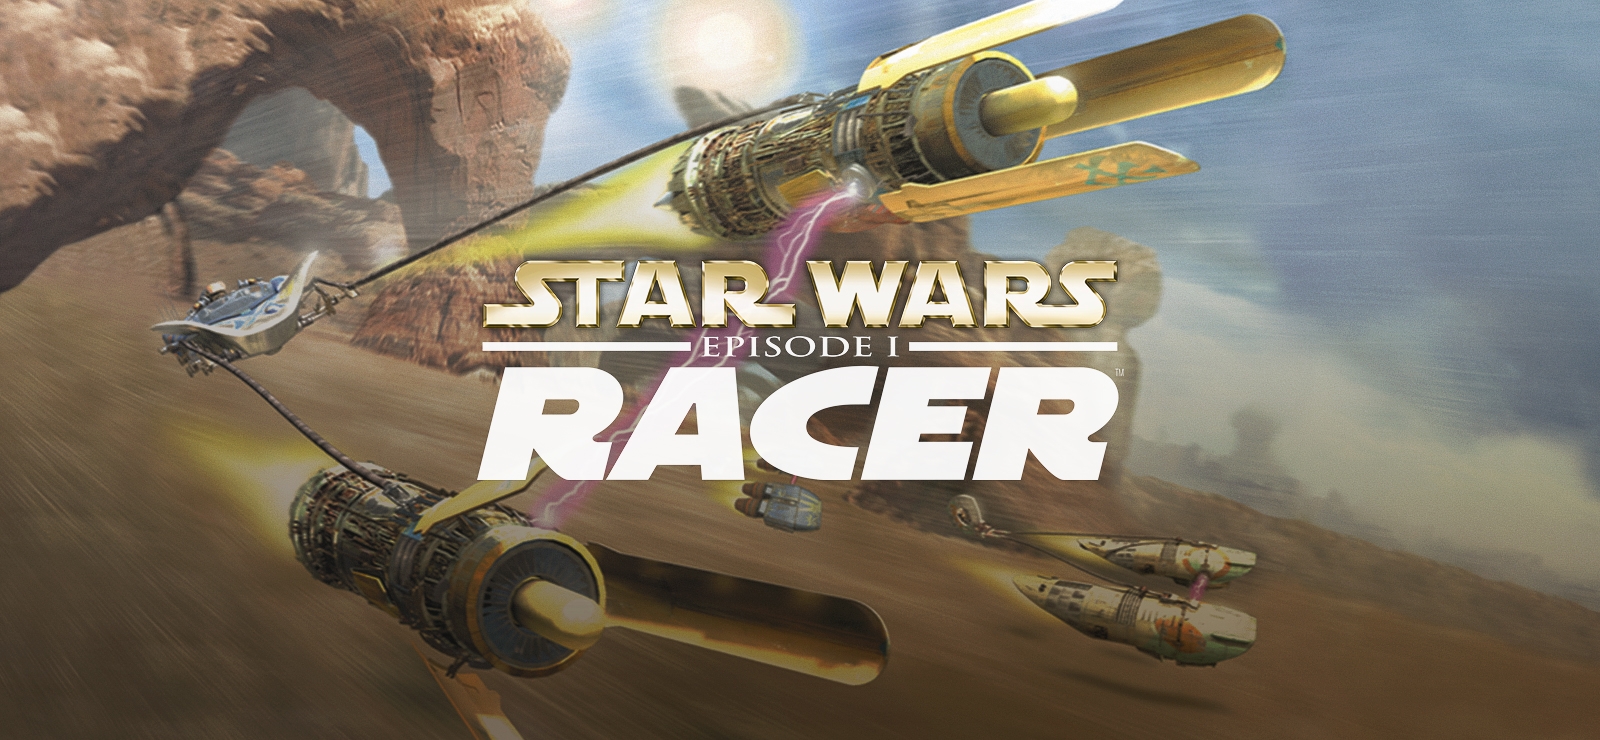 Star-Wars-Day-May-The-4th-2018-Games-Deals-019.jpg